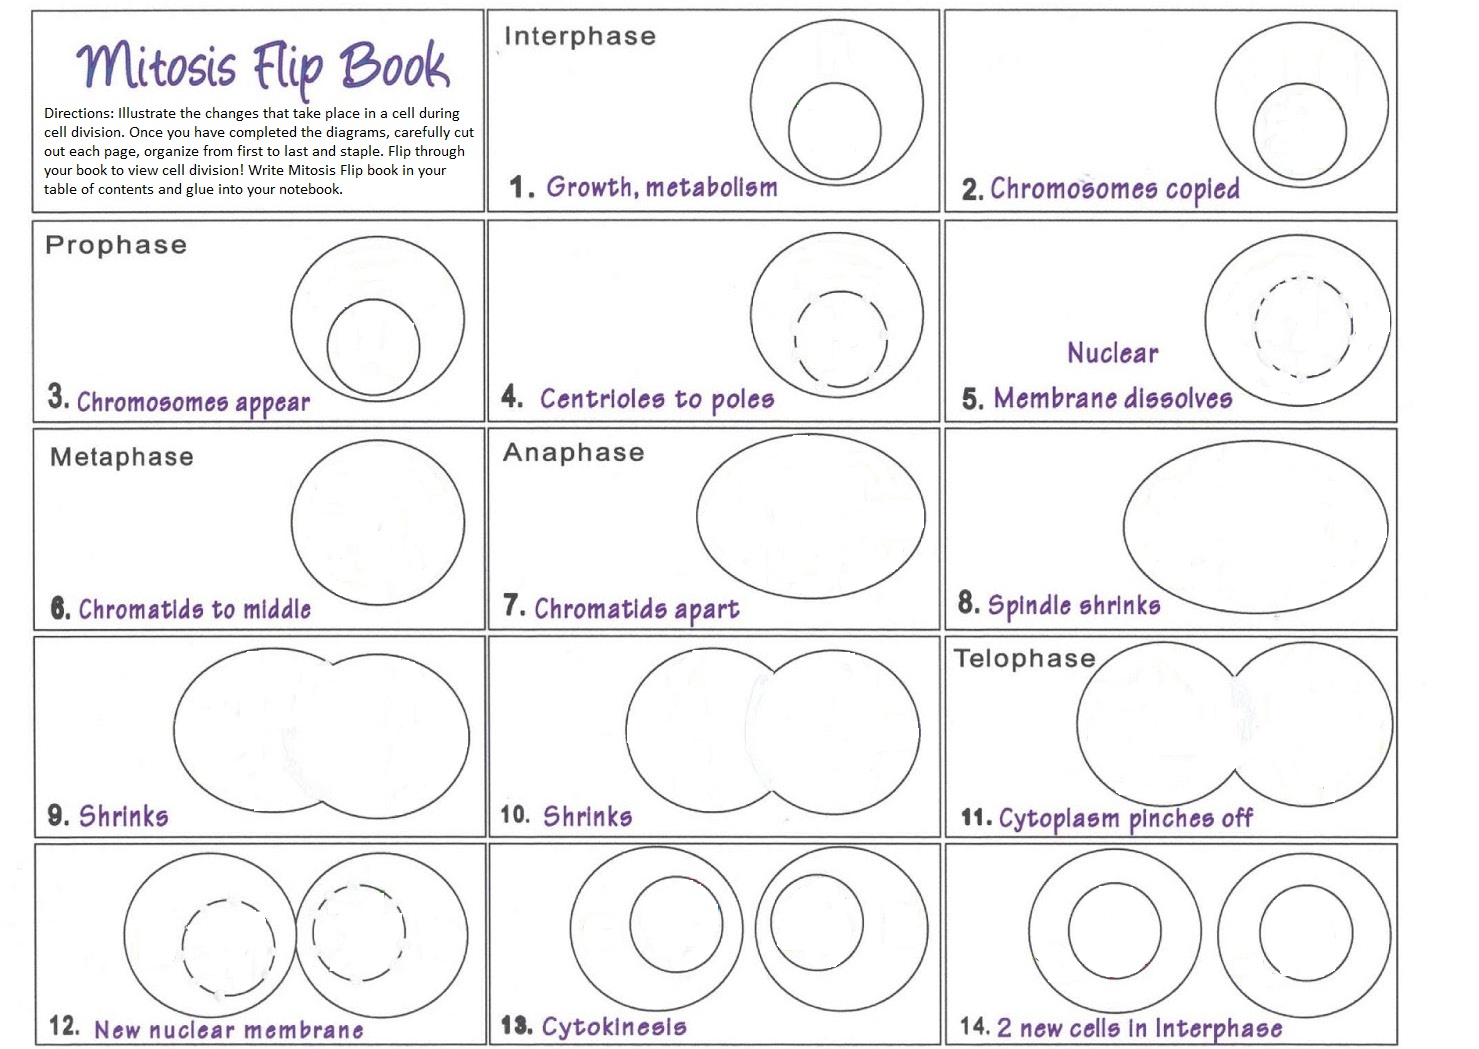 answer key for mitosis 14 steps flip book